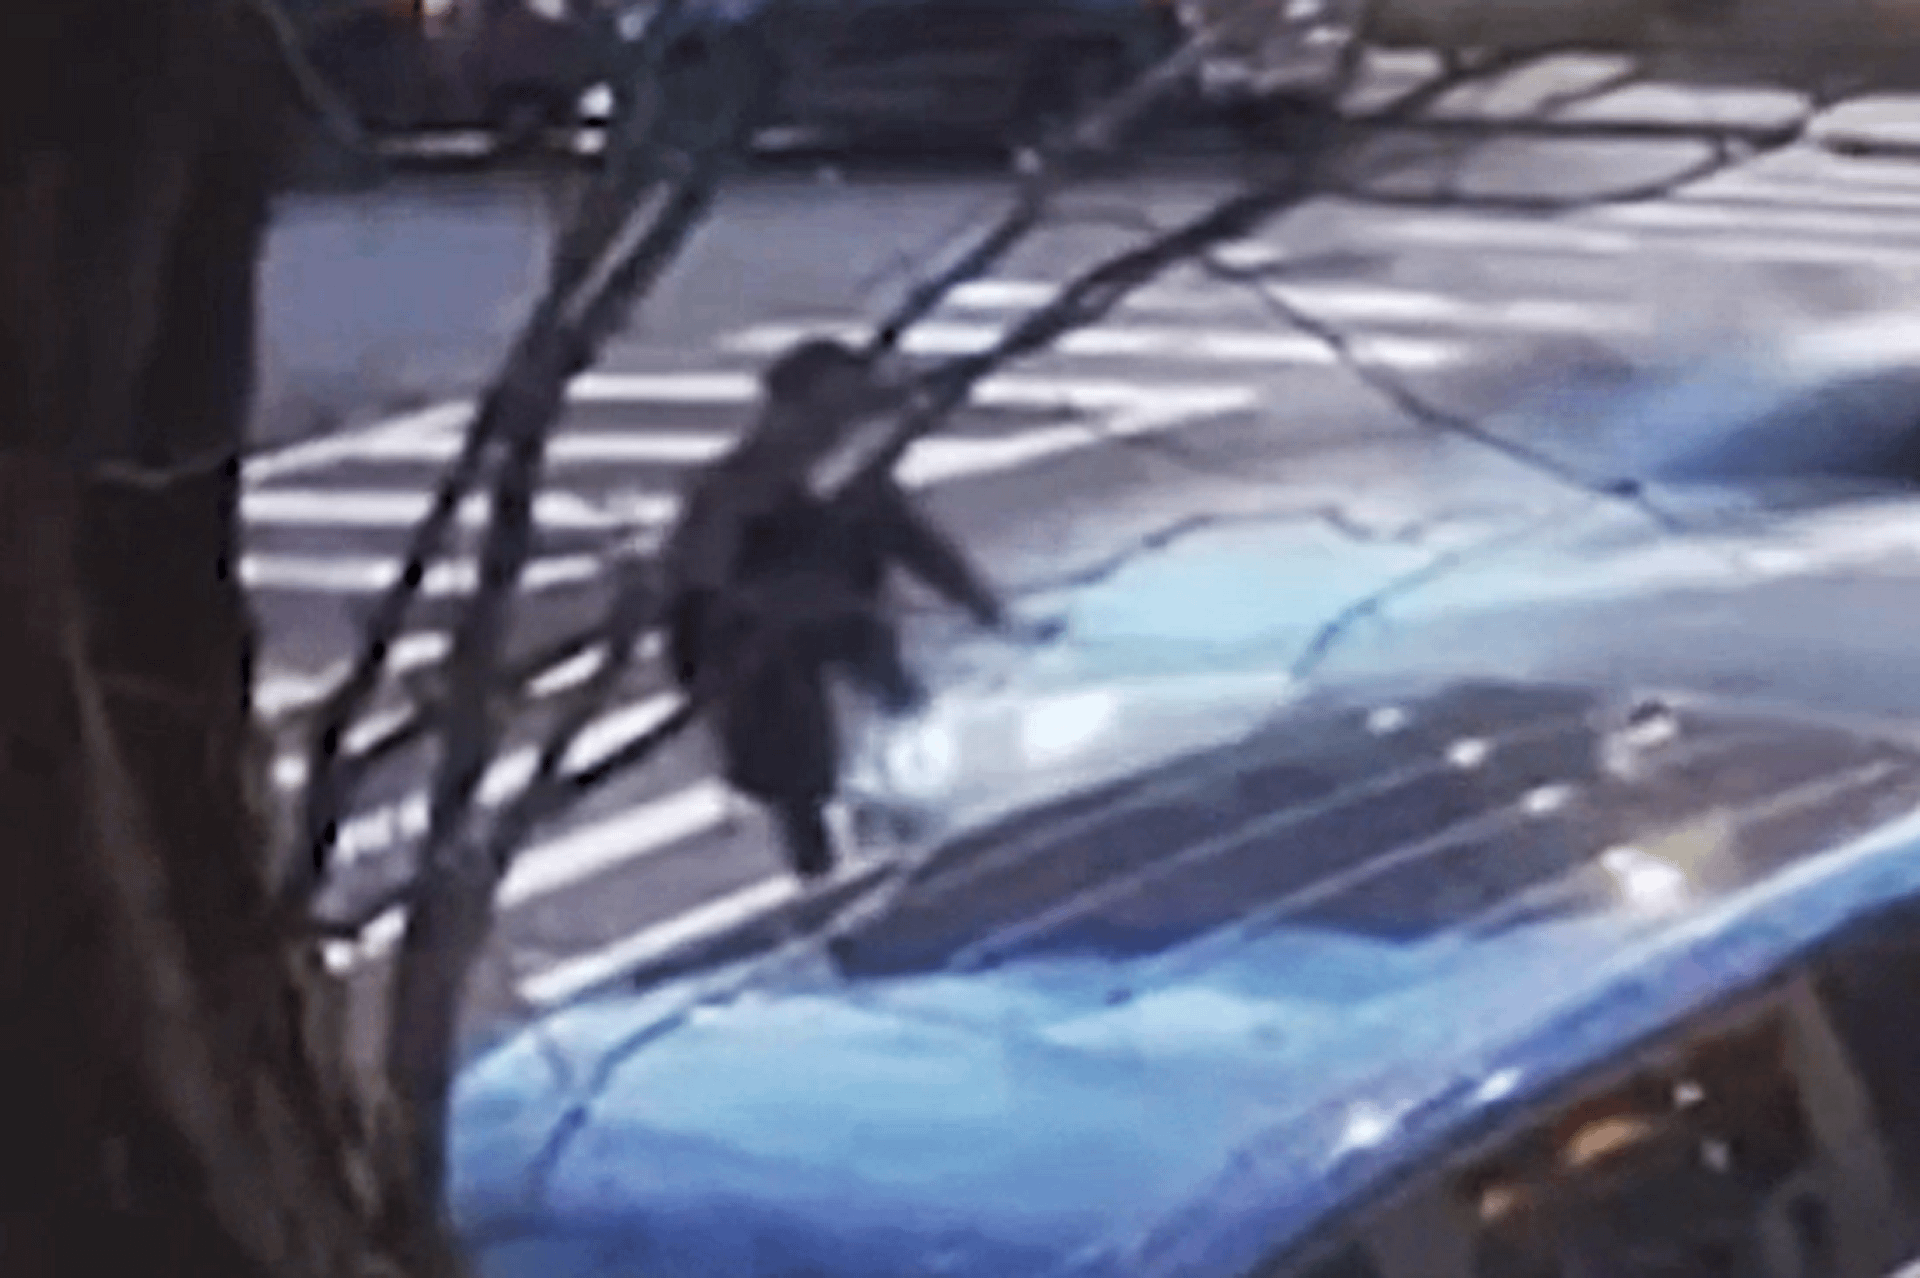 Police investigate New York hit-and-run that left Jewish man injured as possible hate crime